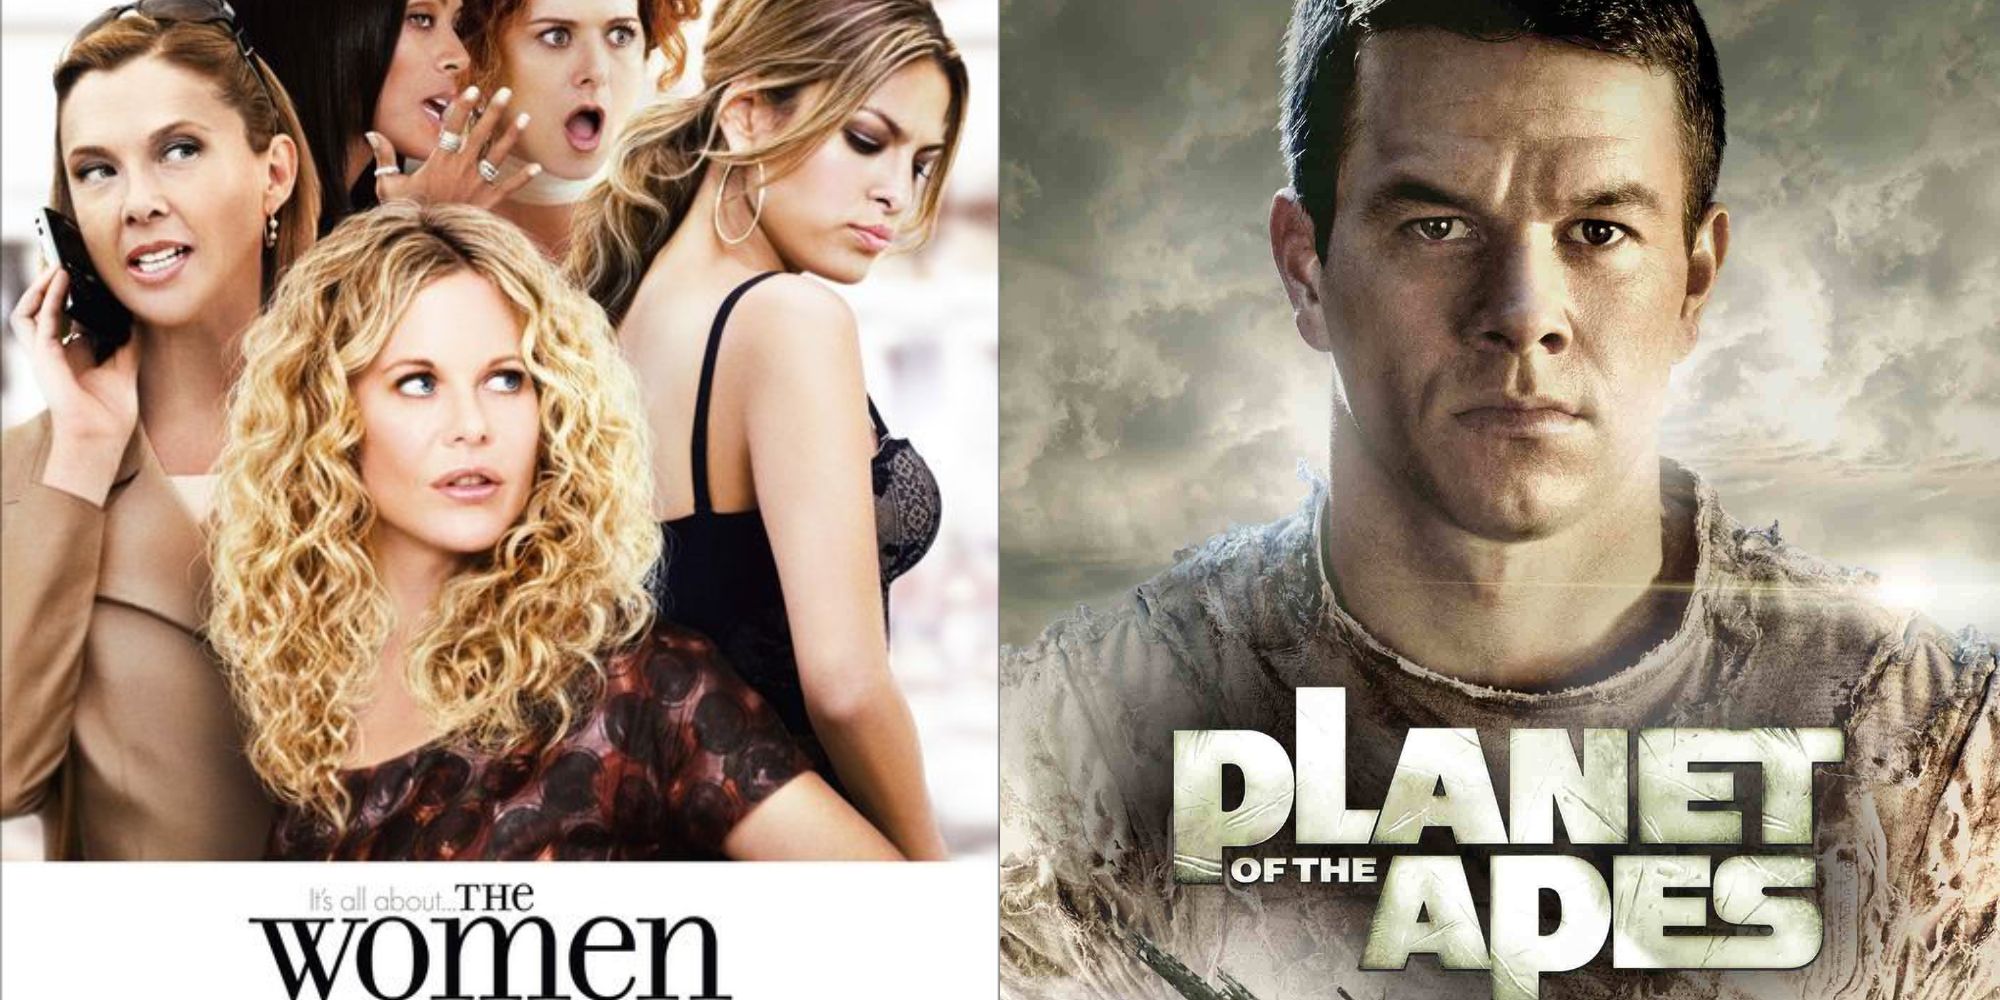 Split image showing posters for The Women 2008 and Planet of the Apes 2001.